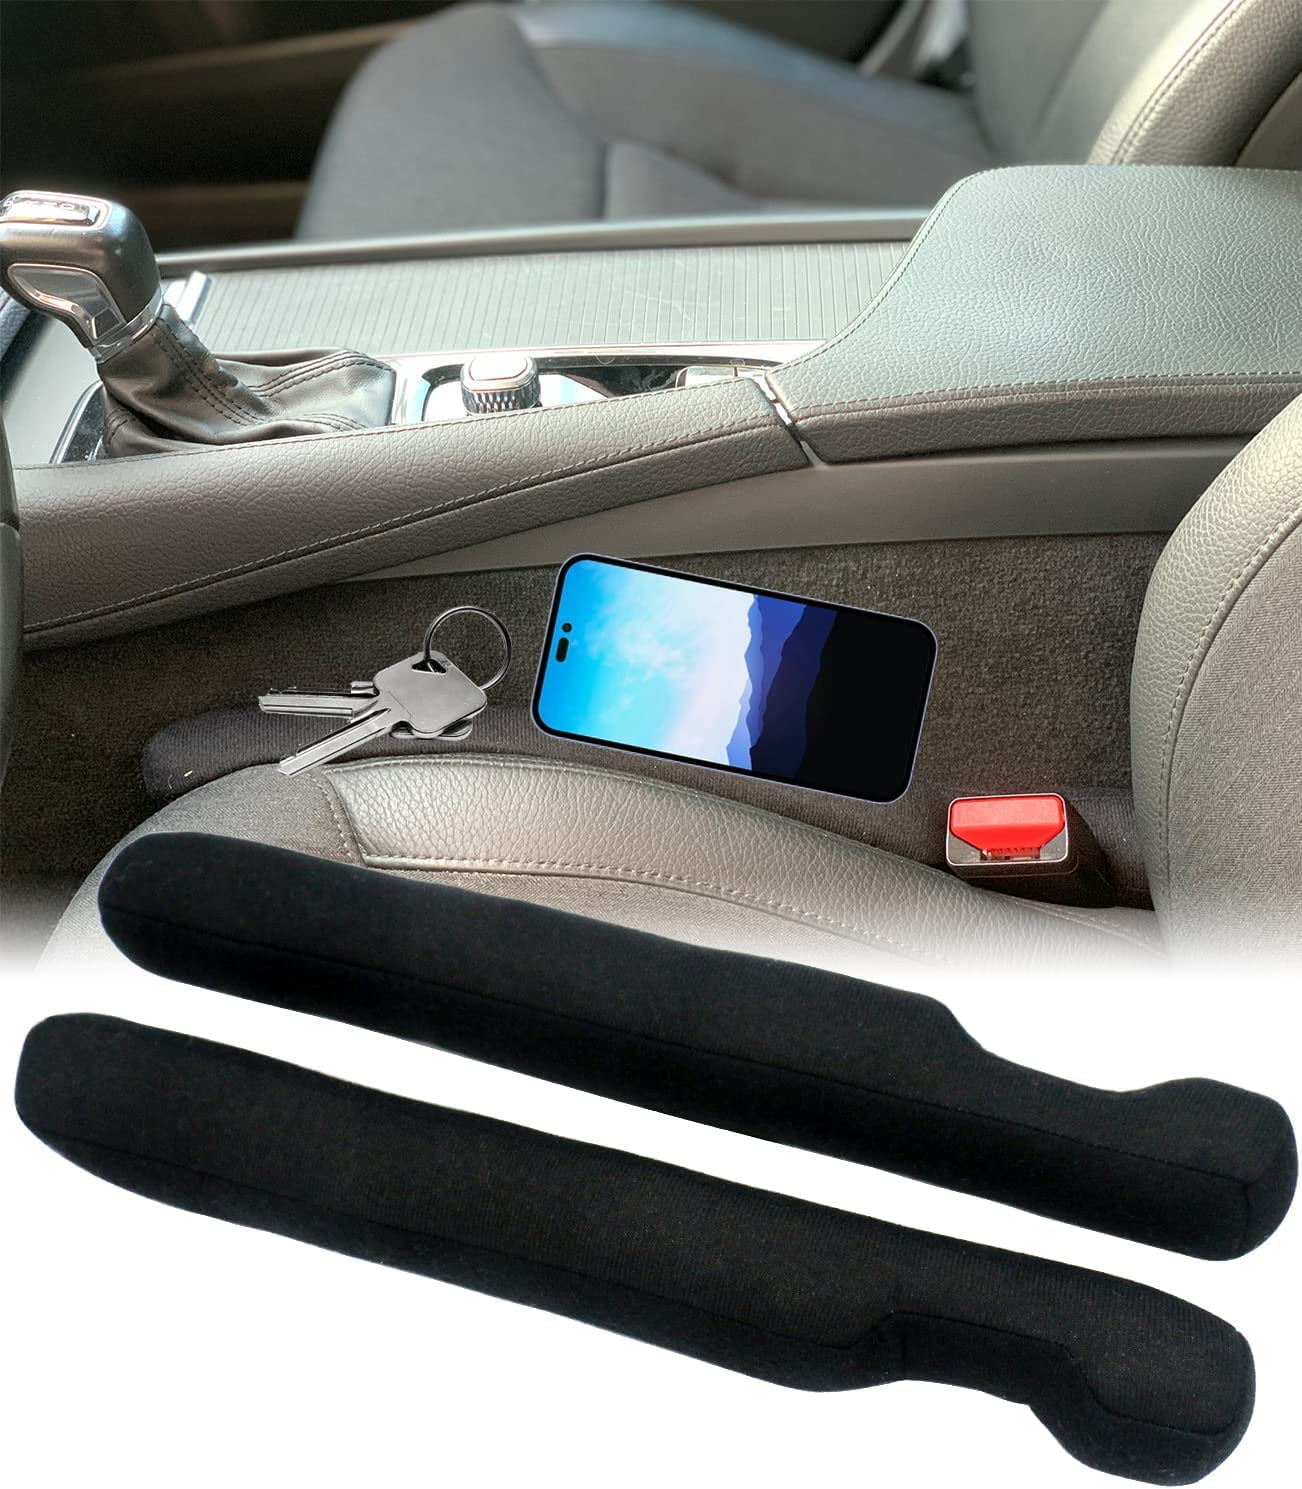 Homaupt Leather Car Seat Gap Filler Universal for Car Truck SUV to Block  The Gap Between Seat and Console Stop Things from Dropping 2 Sets Beige